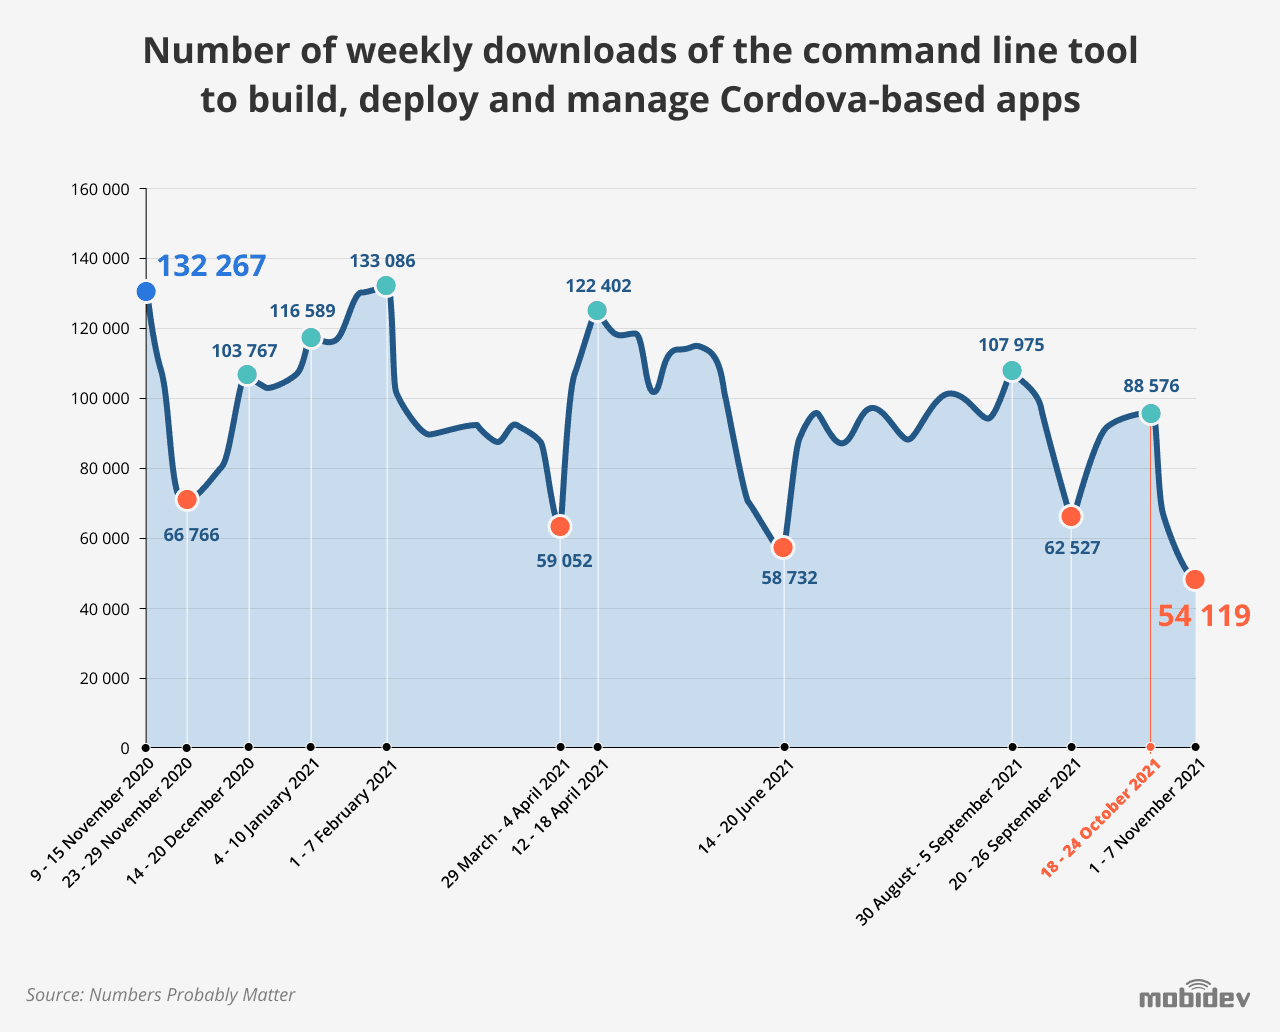 Number of weekly downloads of the command line tool to build, deploy and manage Cordova-based apps dropped by almost 41% within the period from November 2020 to November 2021